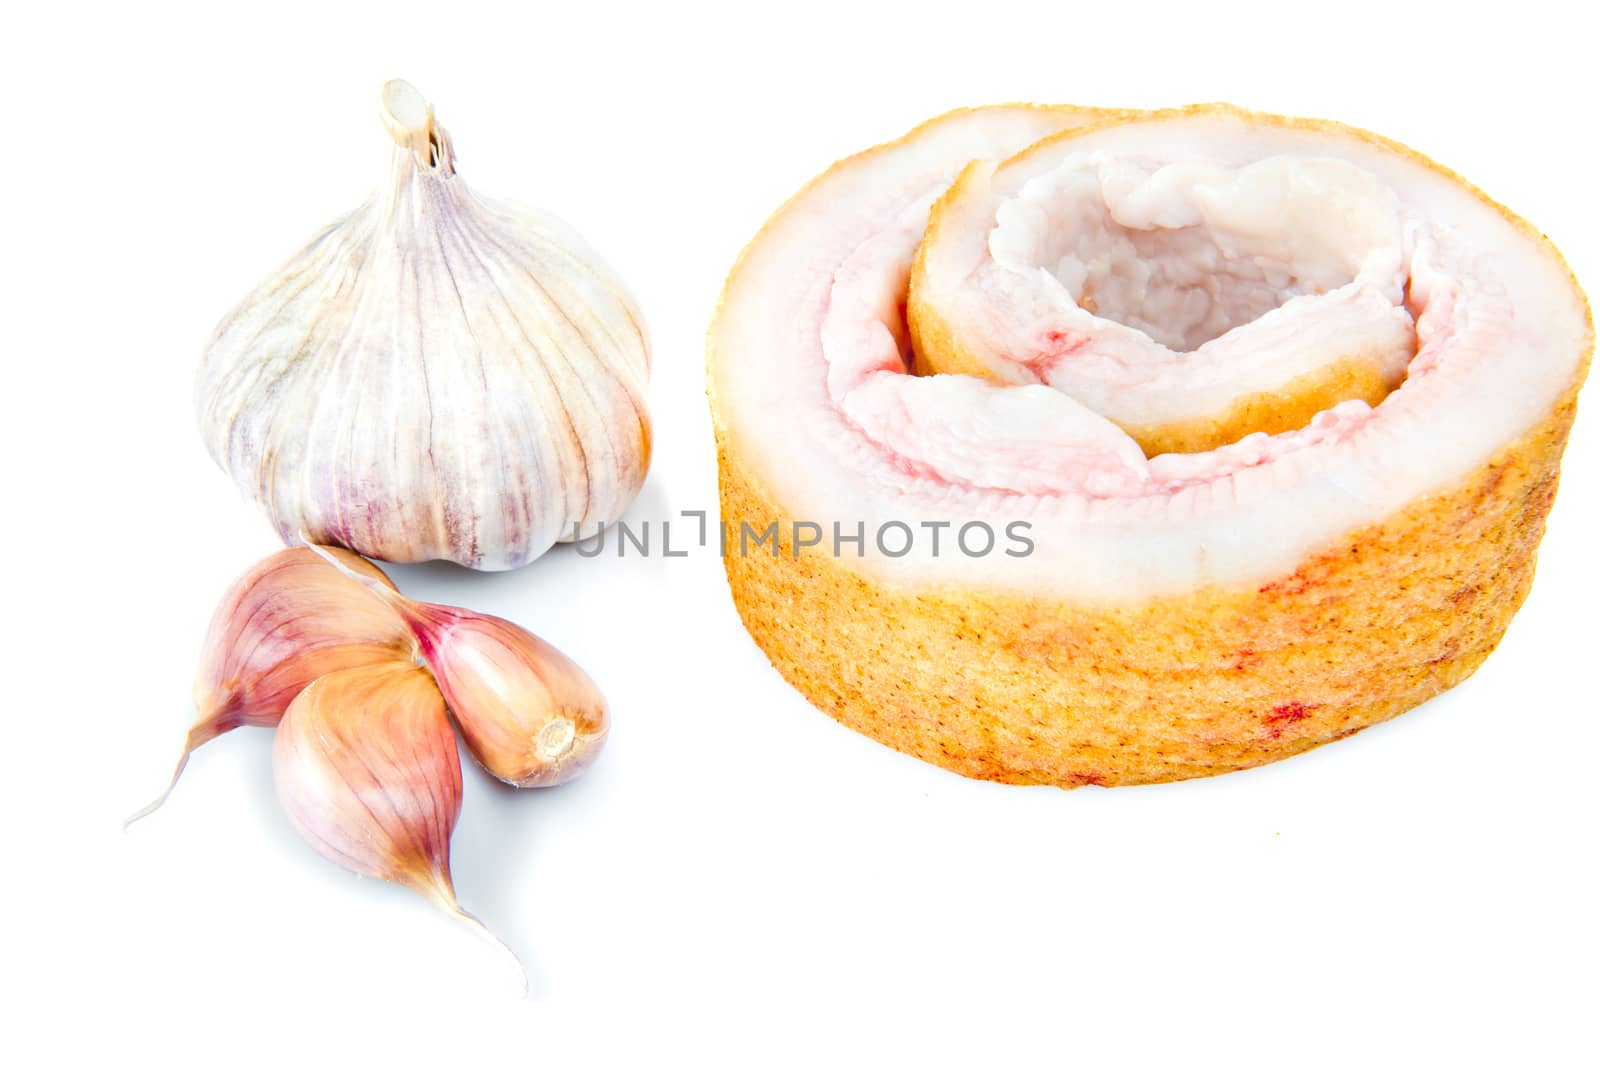 Pork belly with garlic isolated on a white background.